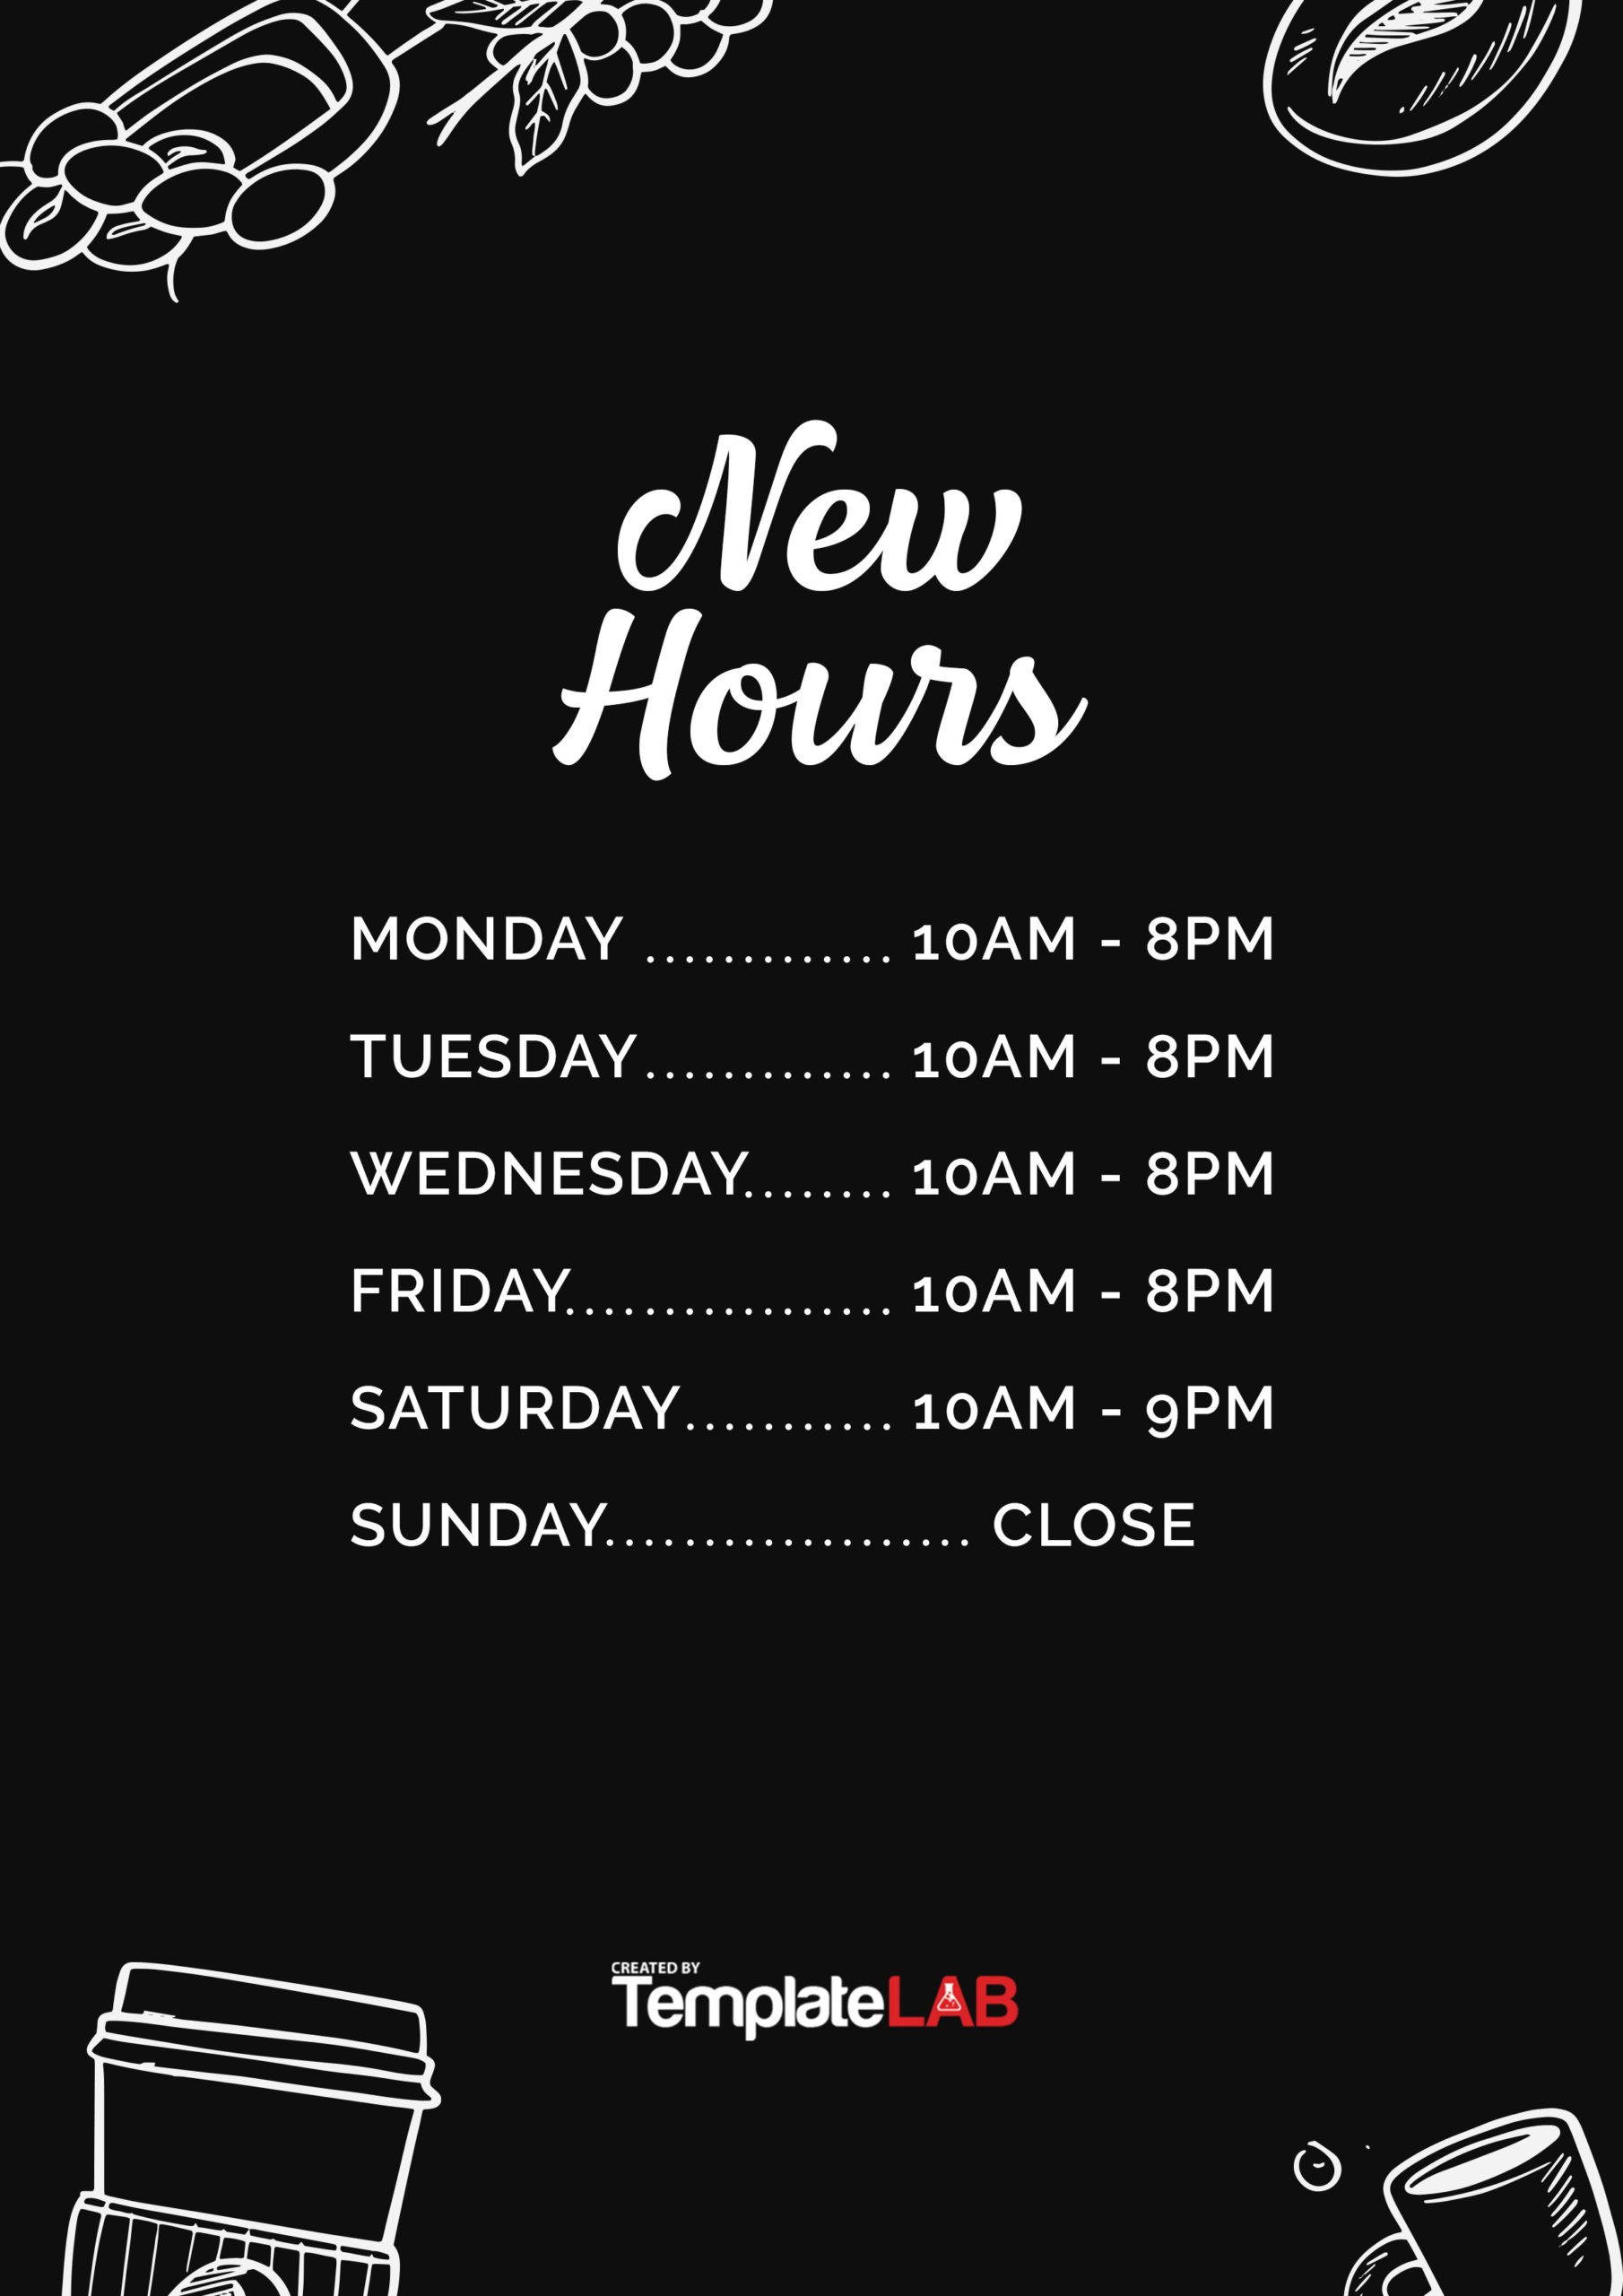 Free New Hours Template V2